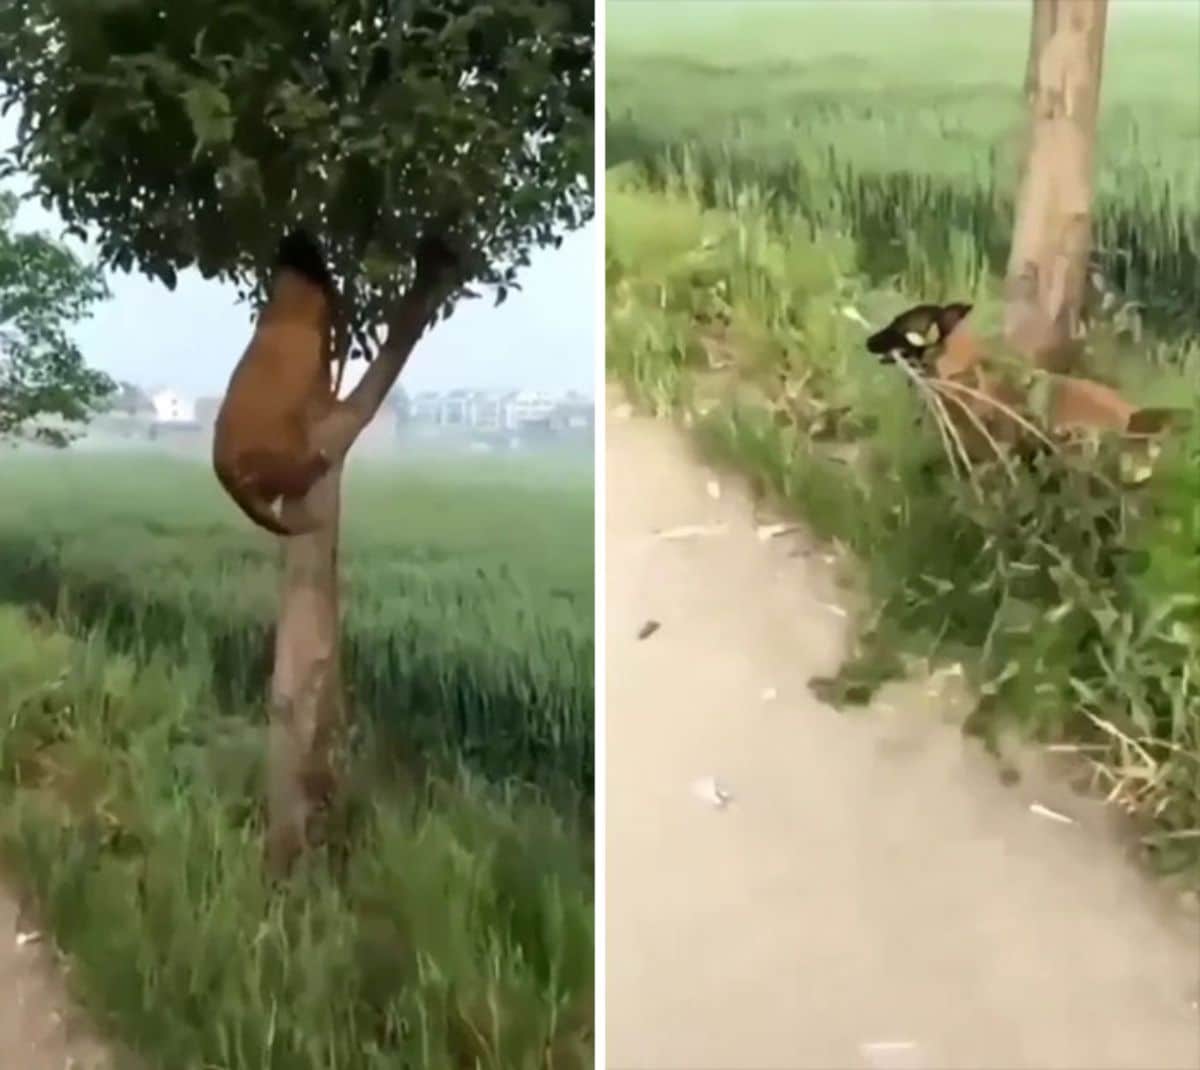 brown and black dog up in a tree in the first photo and then on the ground next to the tree in the second photo